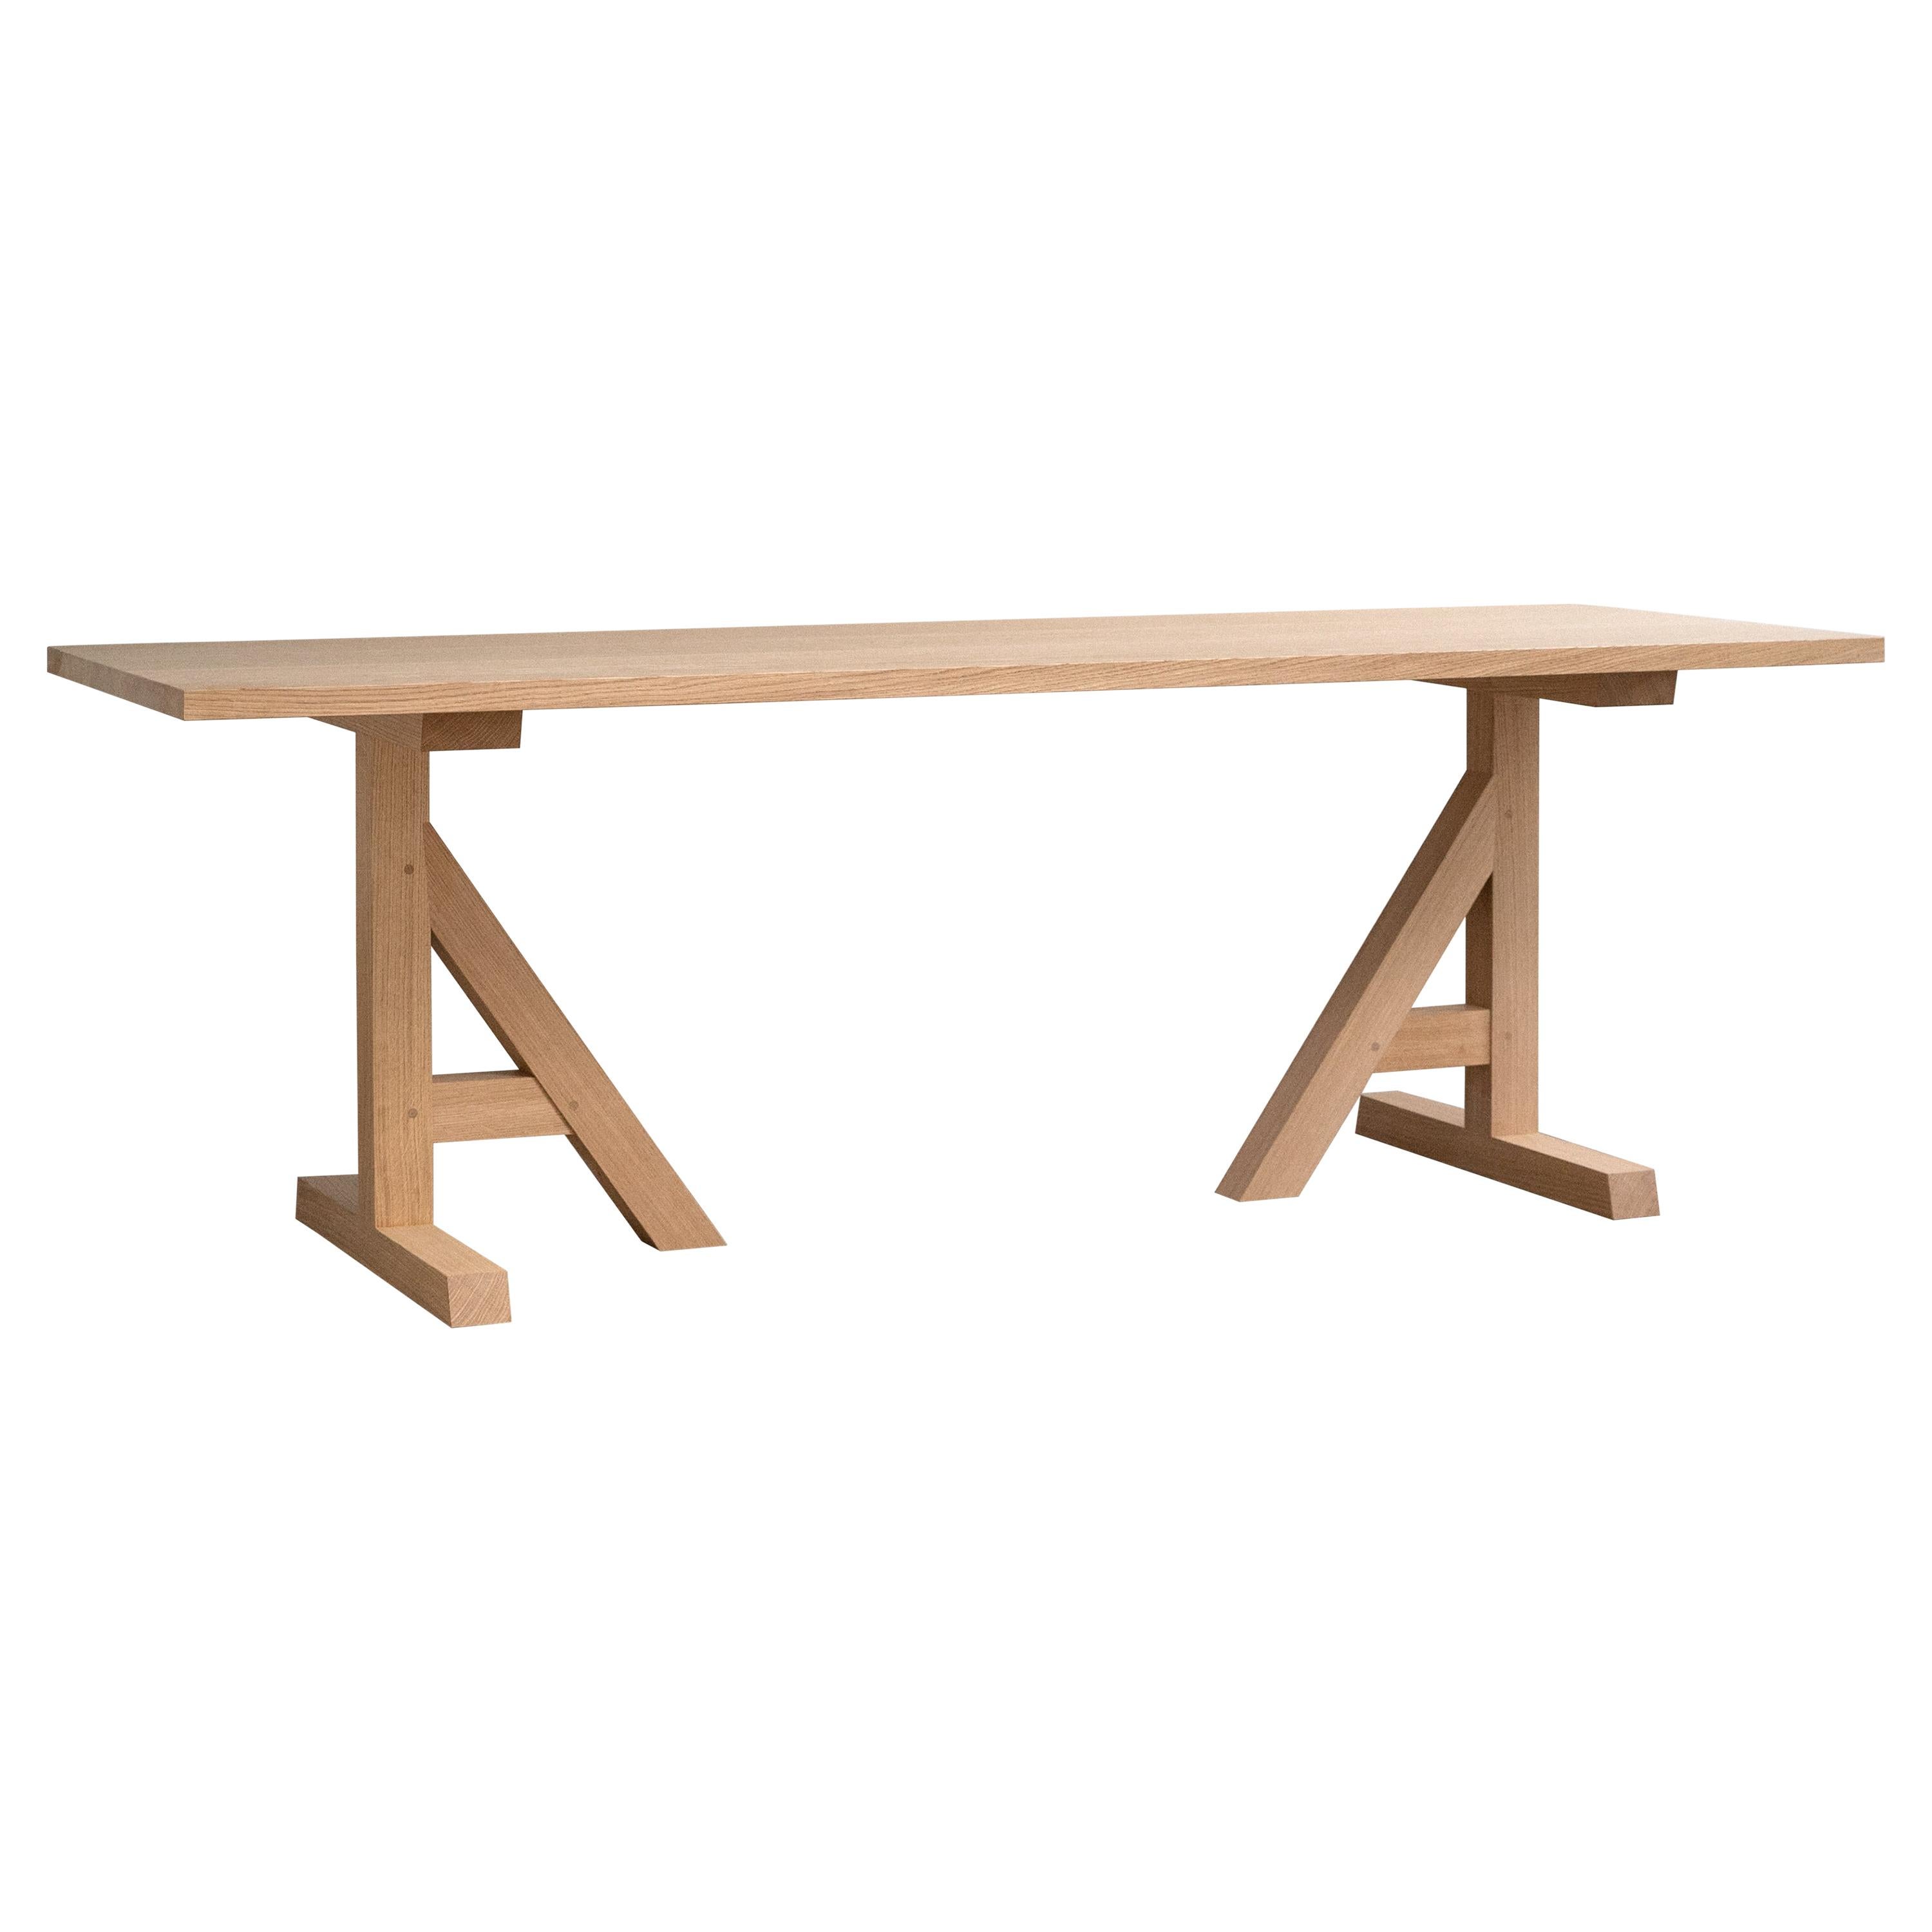 Handcrafted English Oak Table